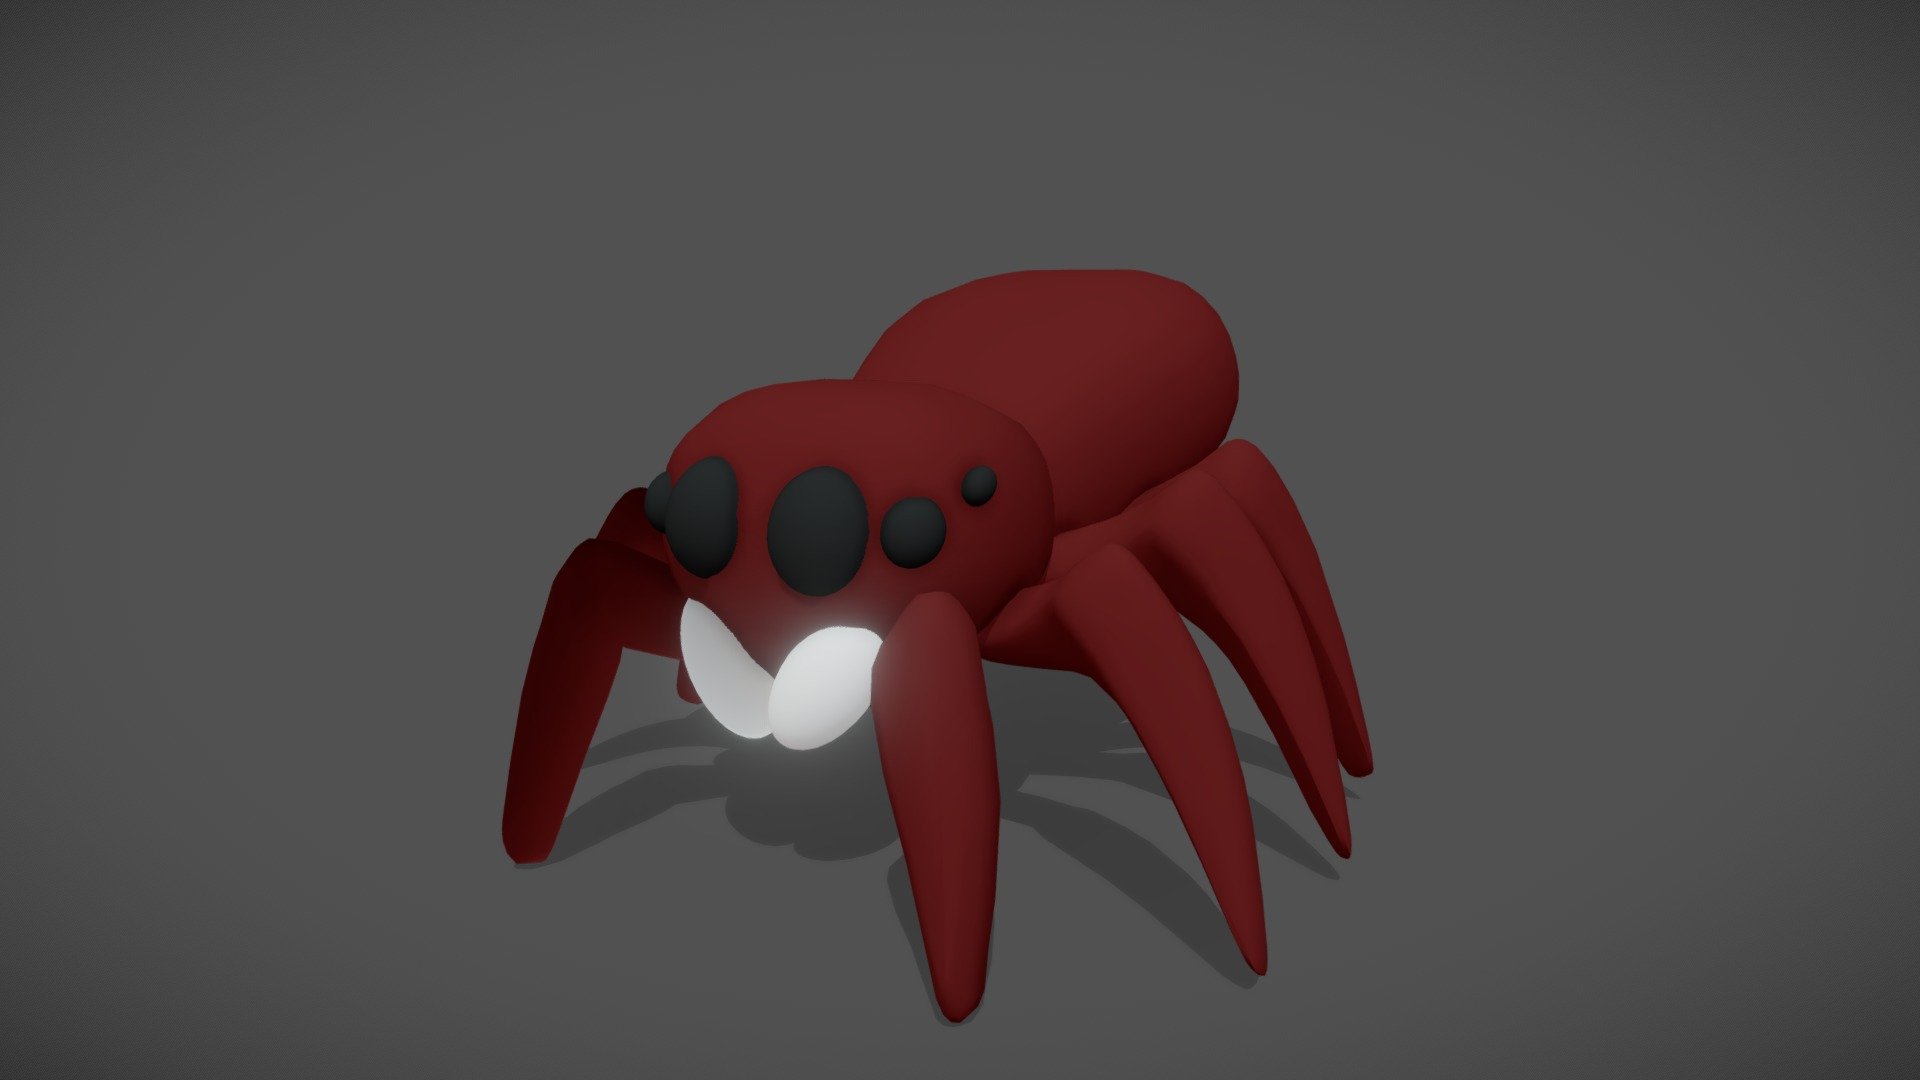 Wanted to try to make more organic shapes. And ended up with a cartoony spider 3d model